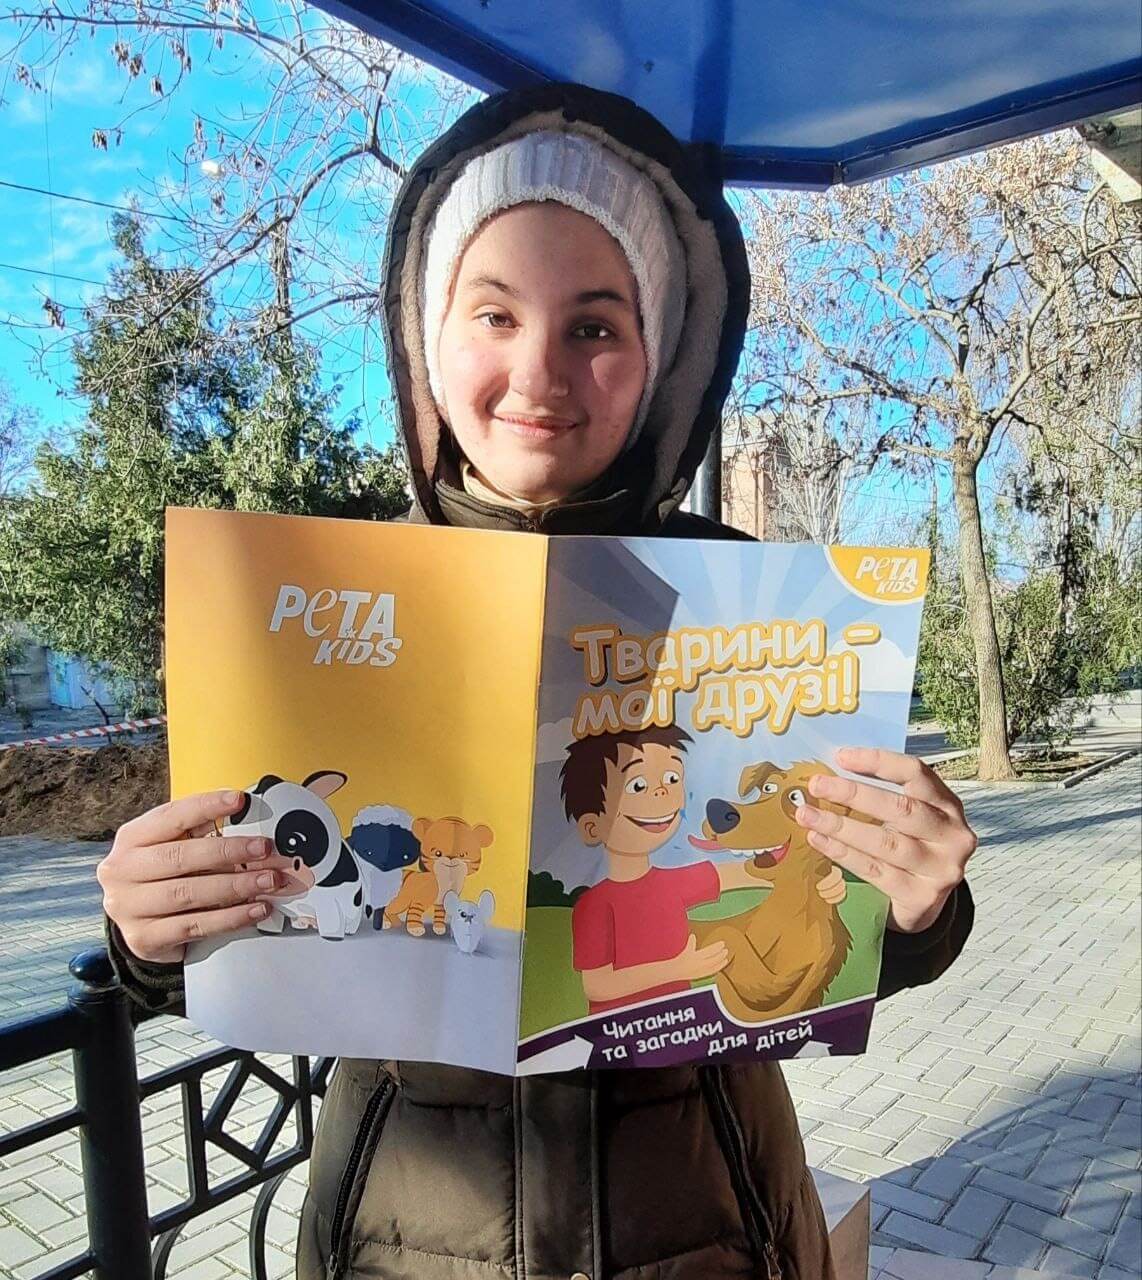 A child in Ukraine poses with a PETA Kids brochure